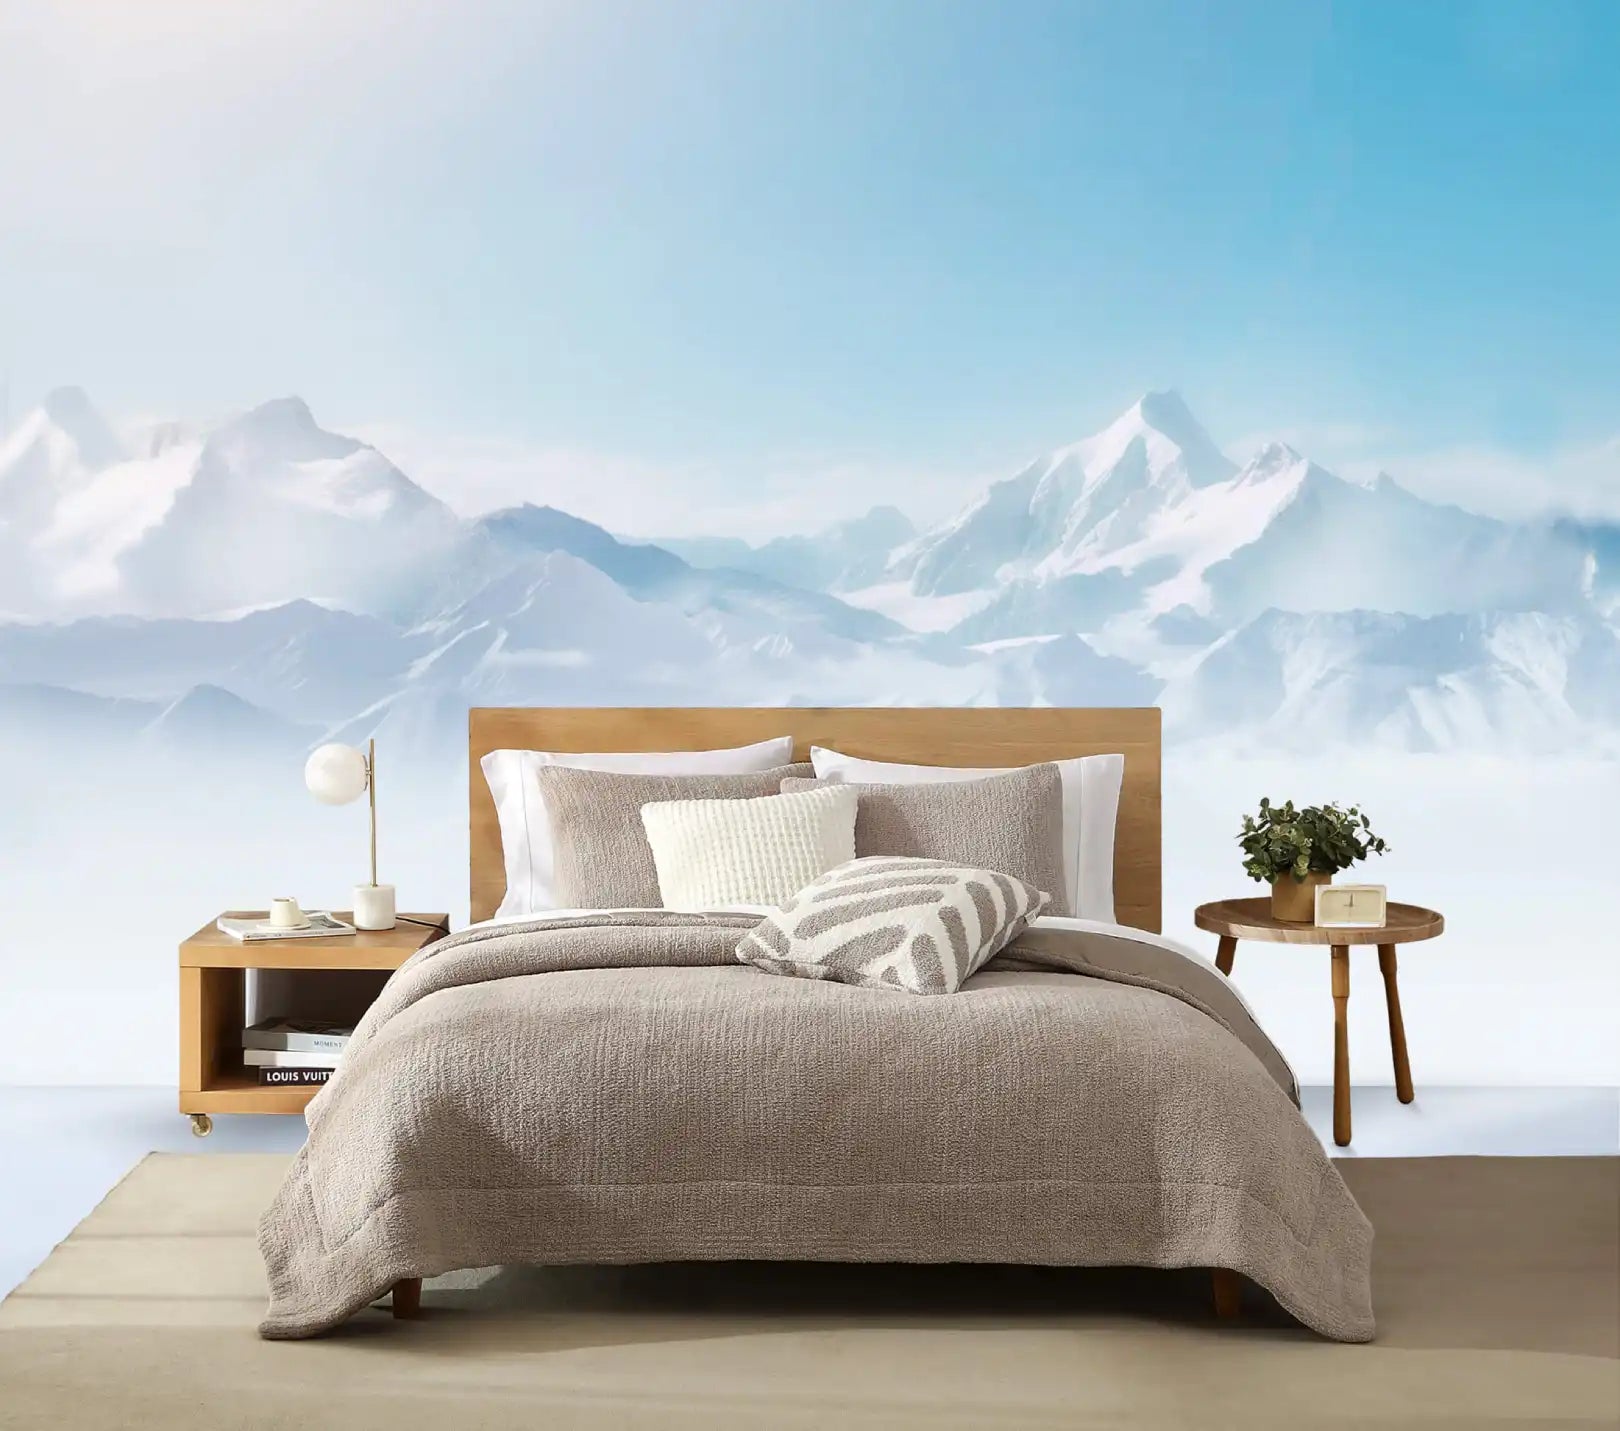 Cooling Comforter Grey Color by Sunday Citizen with Mountain View